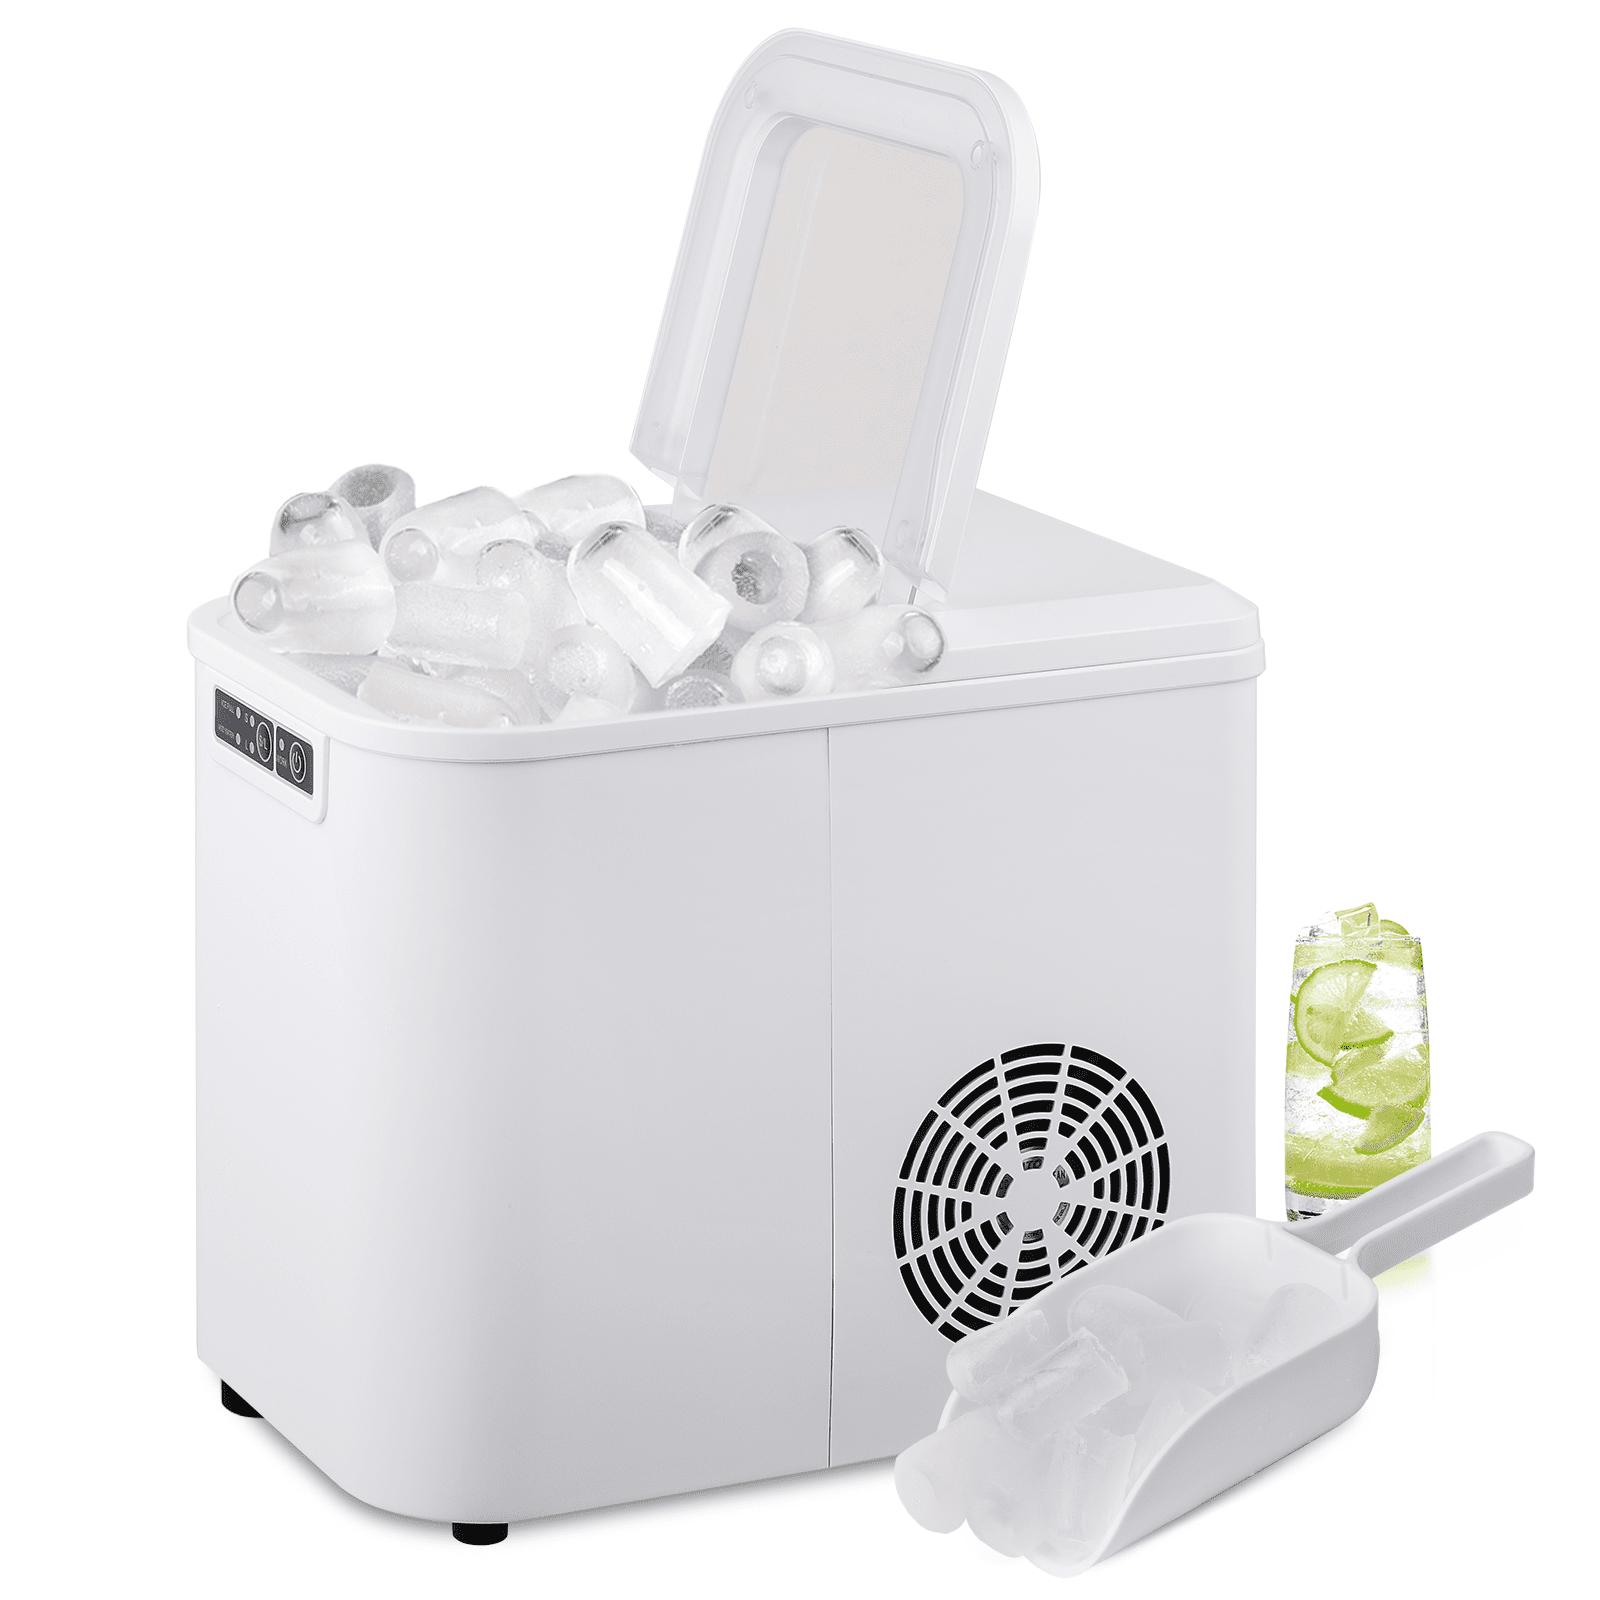 ChefRobot Ice Maker Countertop, Self-Cleaning Ice Maker with Ice Scoop and  Basket, Make 26.5 lbs Ice in 24 Hrs, 9 Ice Cubes Ready in 6-8 Mins, Black 